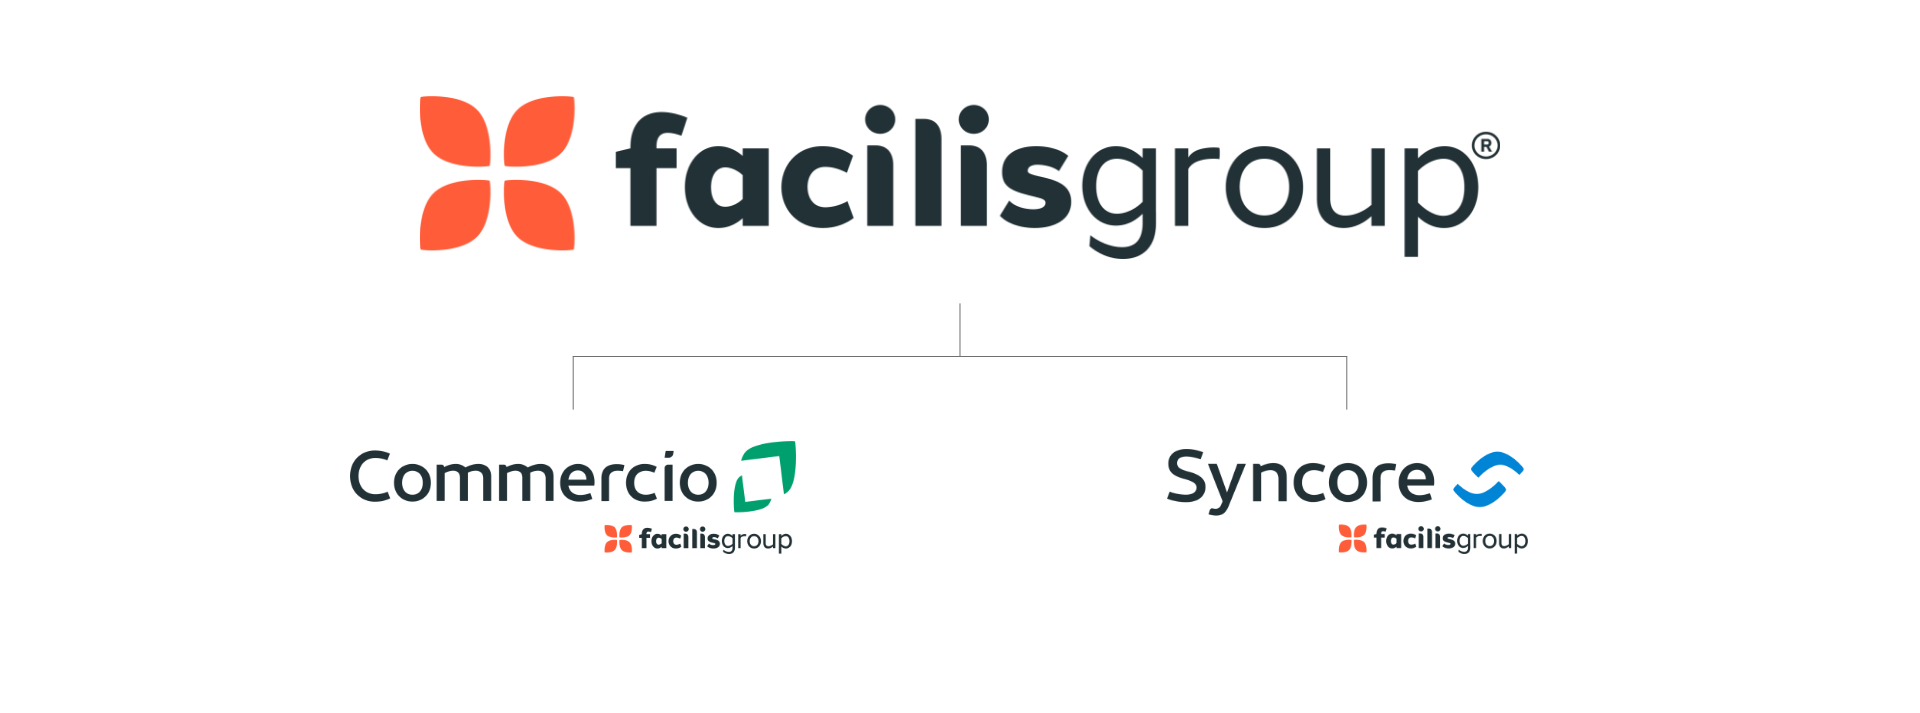 The umbrella brand Facilisgroup branding along with new branding for Commercio and Syncore